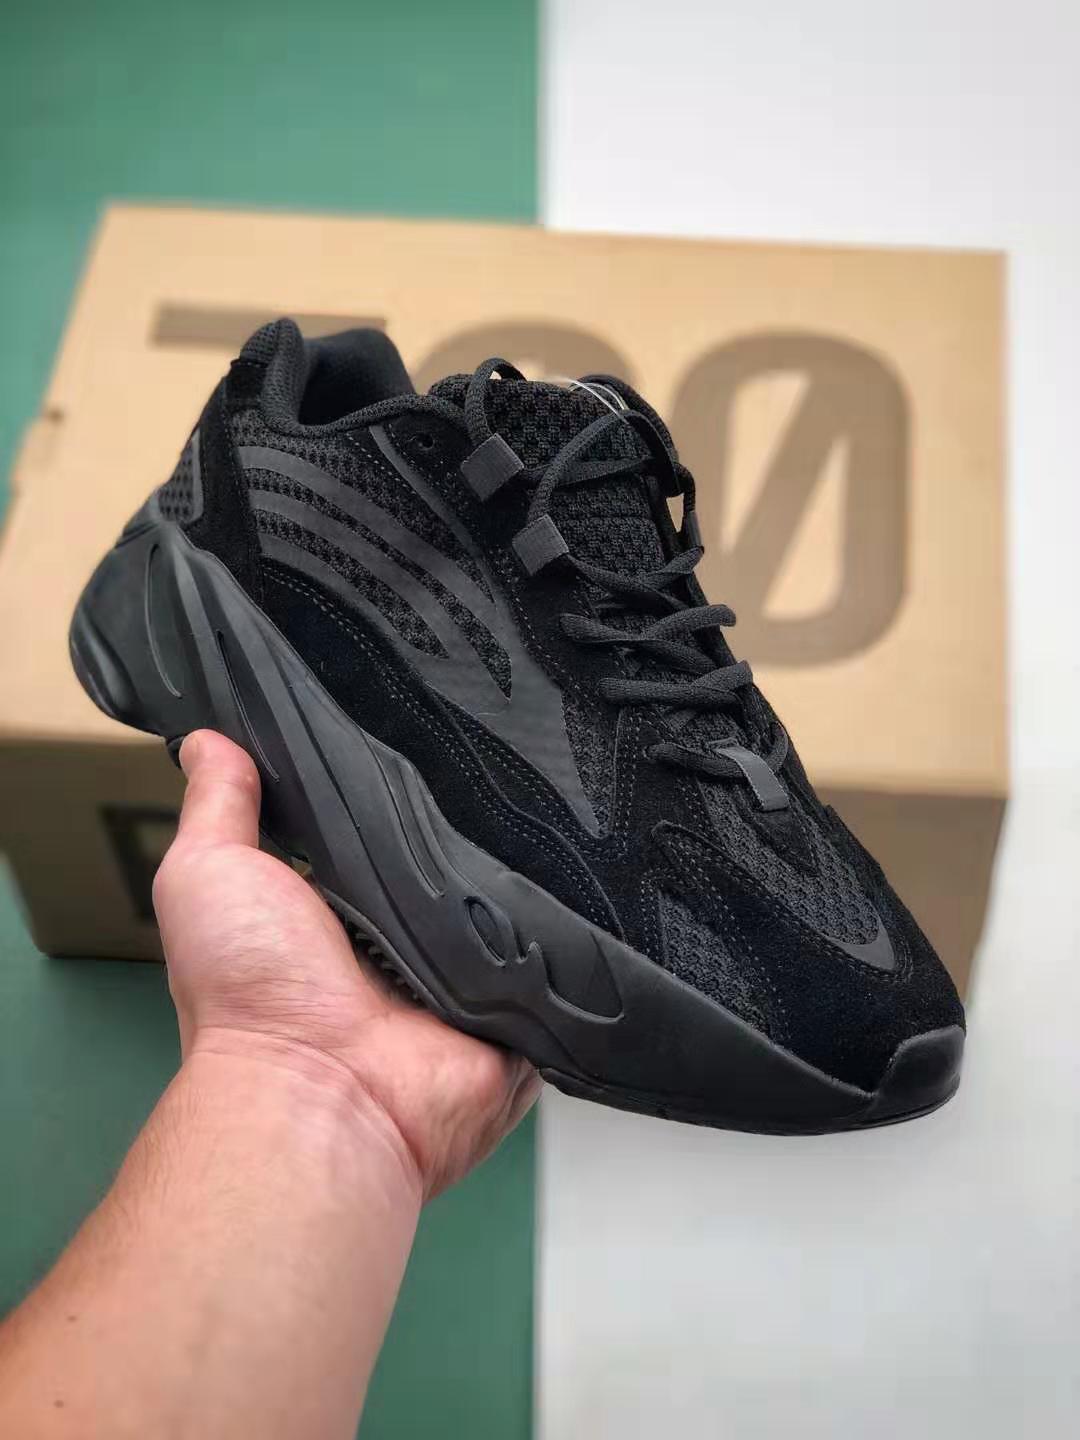 Adidas Yeezy Boost 700 V2 'Vanta' FU6684 - Shop Now & Elevate Your Style